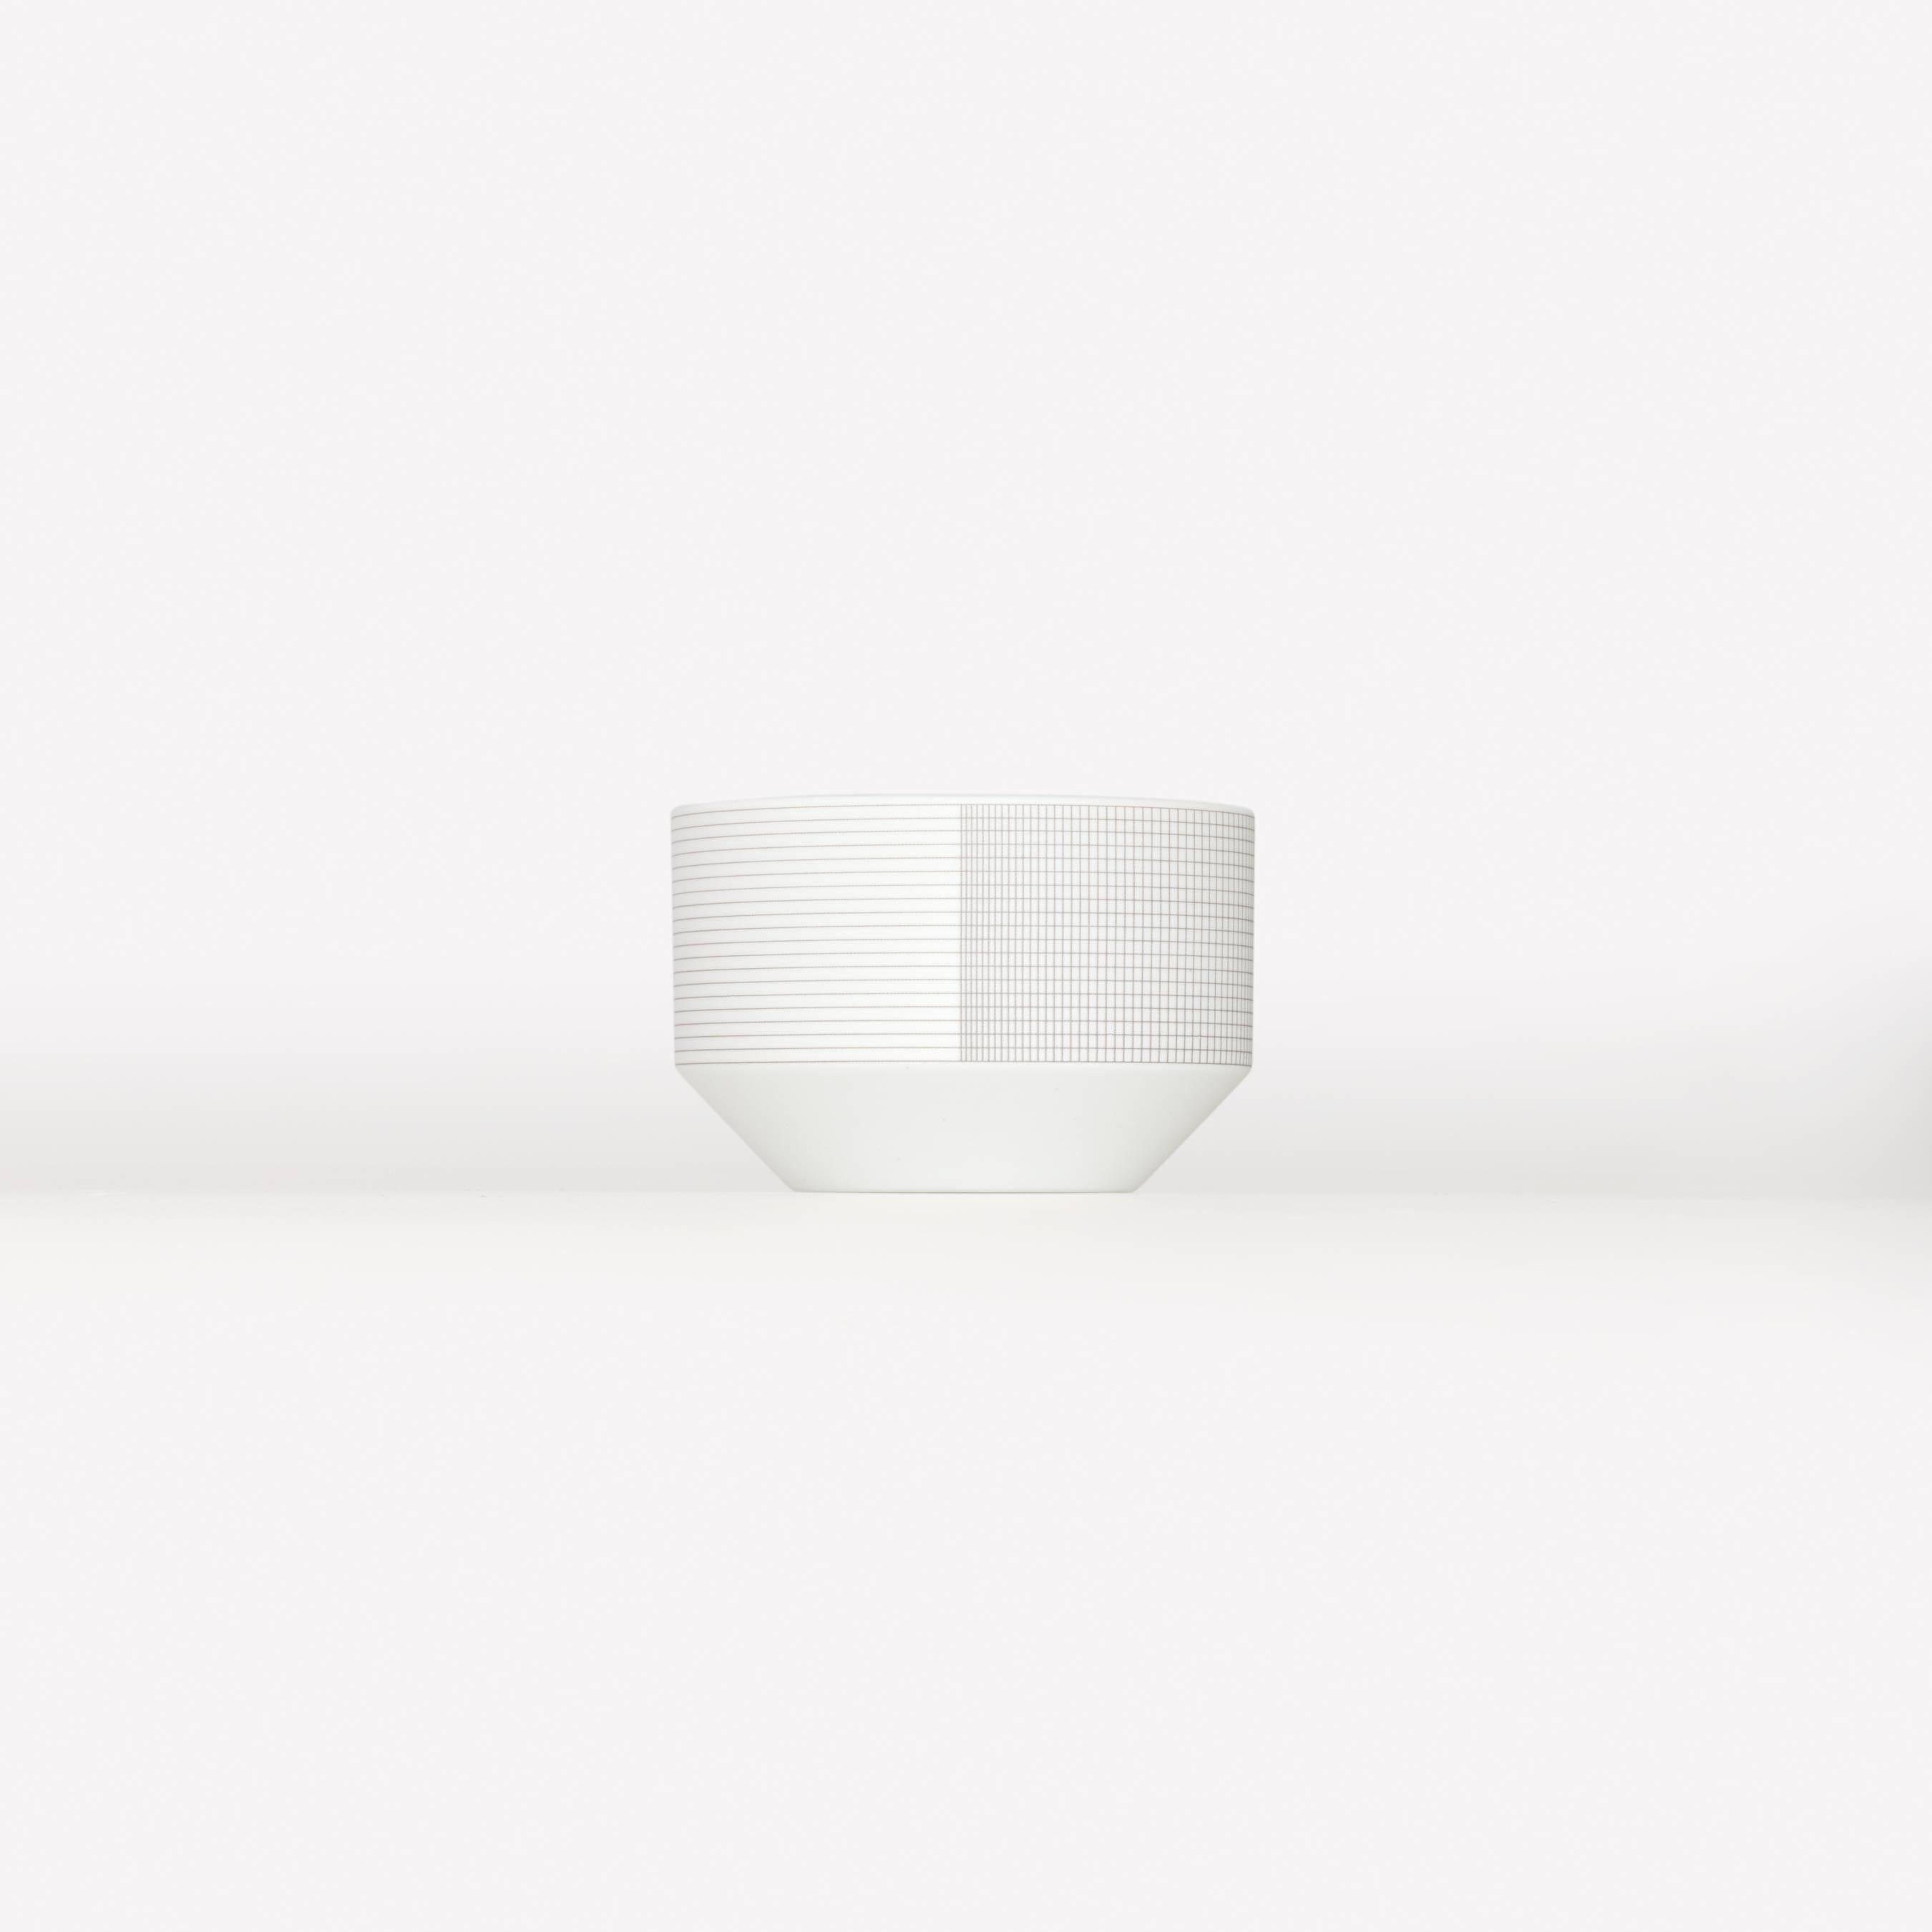 Pattern Porcelain Cup by Scholten & Baijings
003 Zinc

Porcelain with Grid textile graphic. Matte exterior with gloss interior. Made in japan by 1616 / arita Japan. Dishwasher safe.

Scholten & Baijings for Maharam is a collection of home goods and